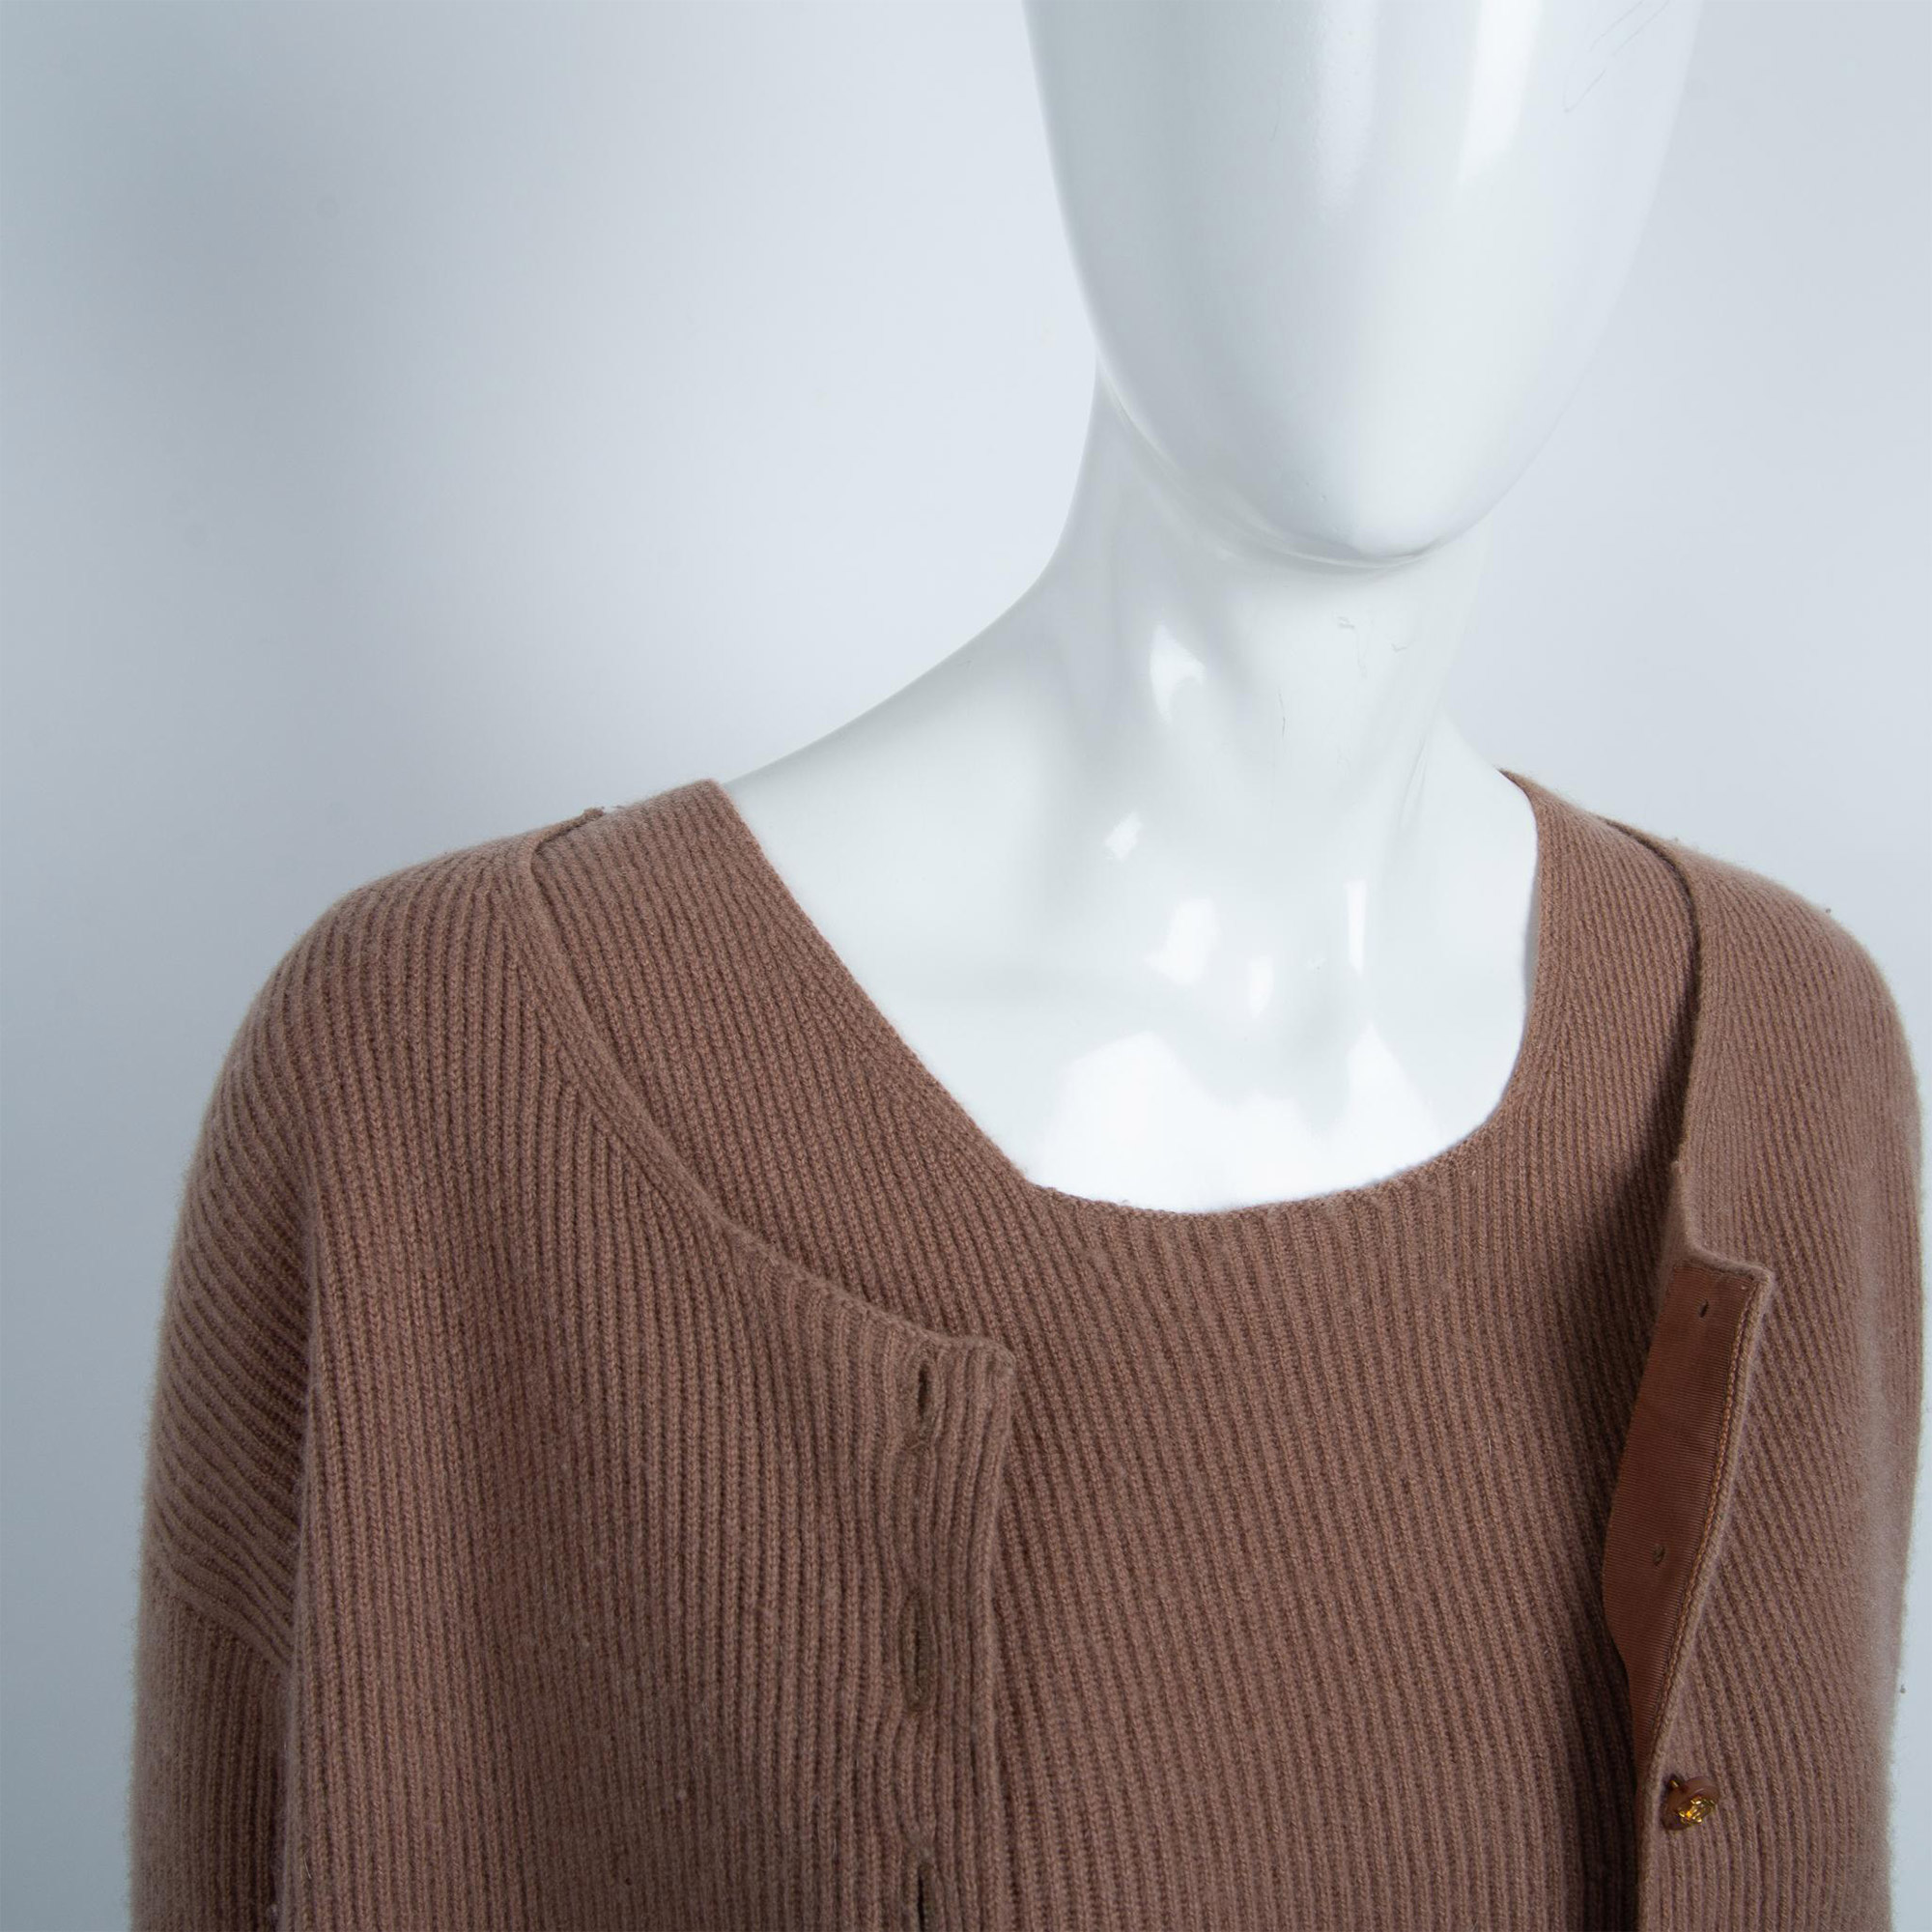 2pc Vintage Coco Chanel Cardigan Set, Size S - Image 3 of 10